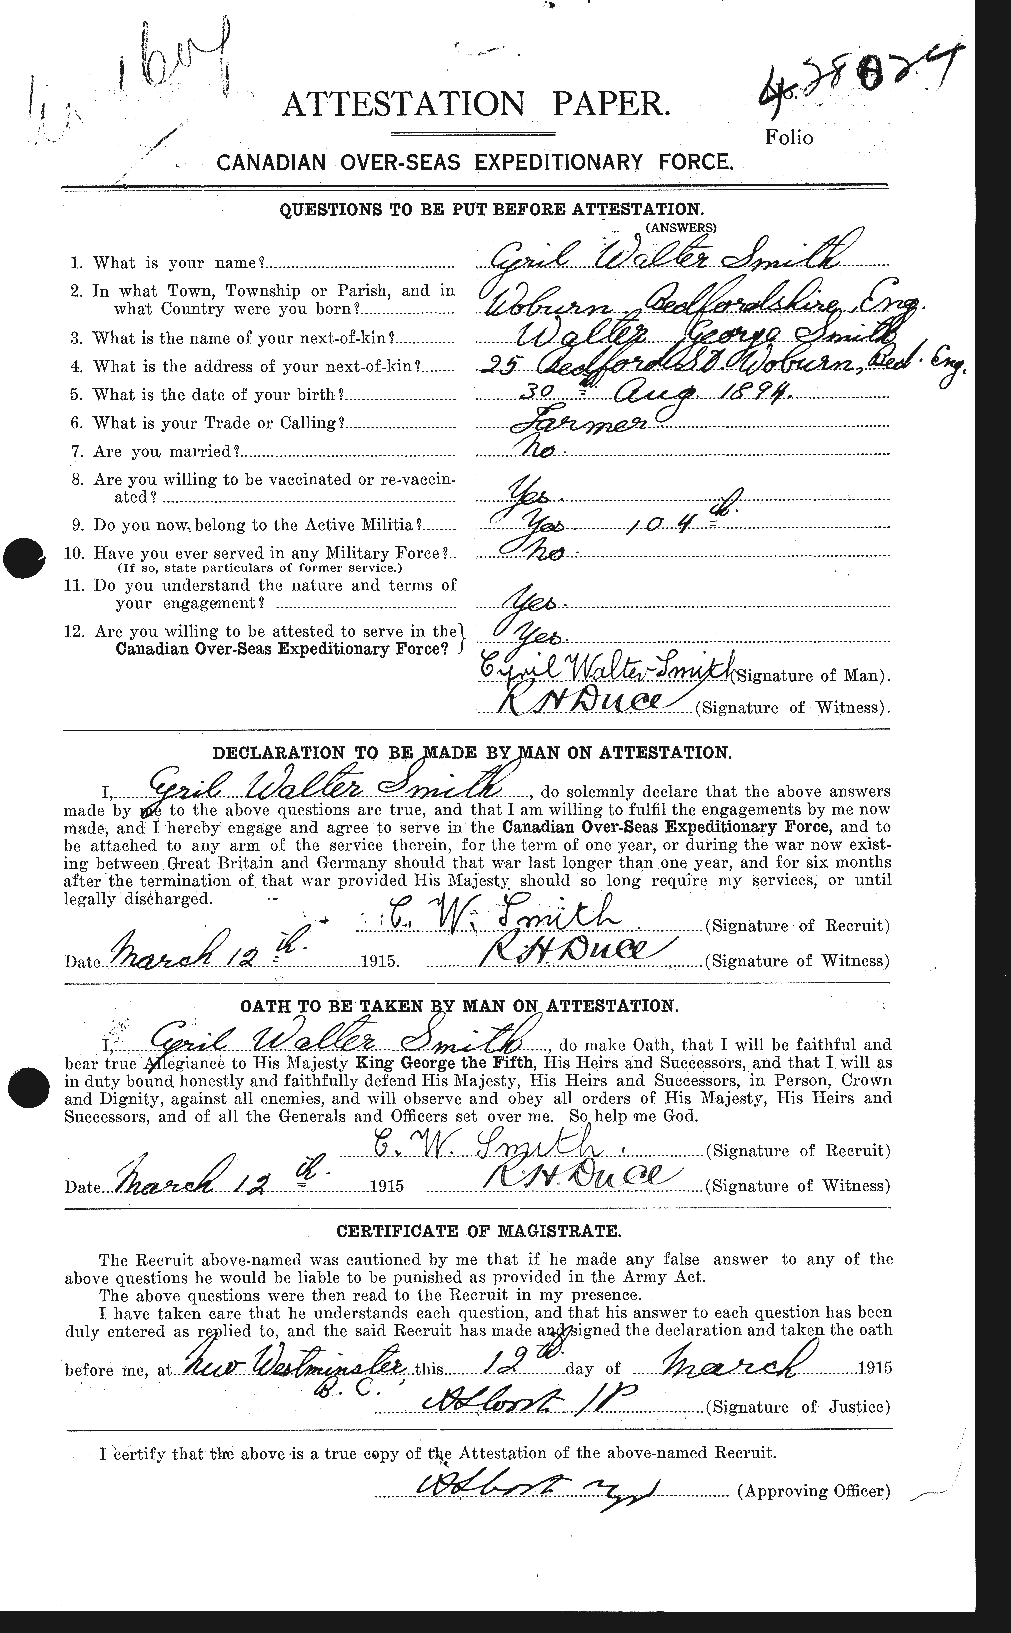 Personnel Records of the First World War - CEF 102678a